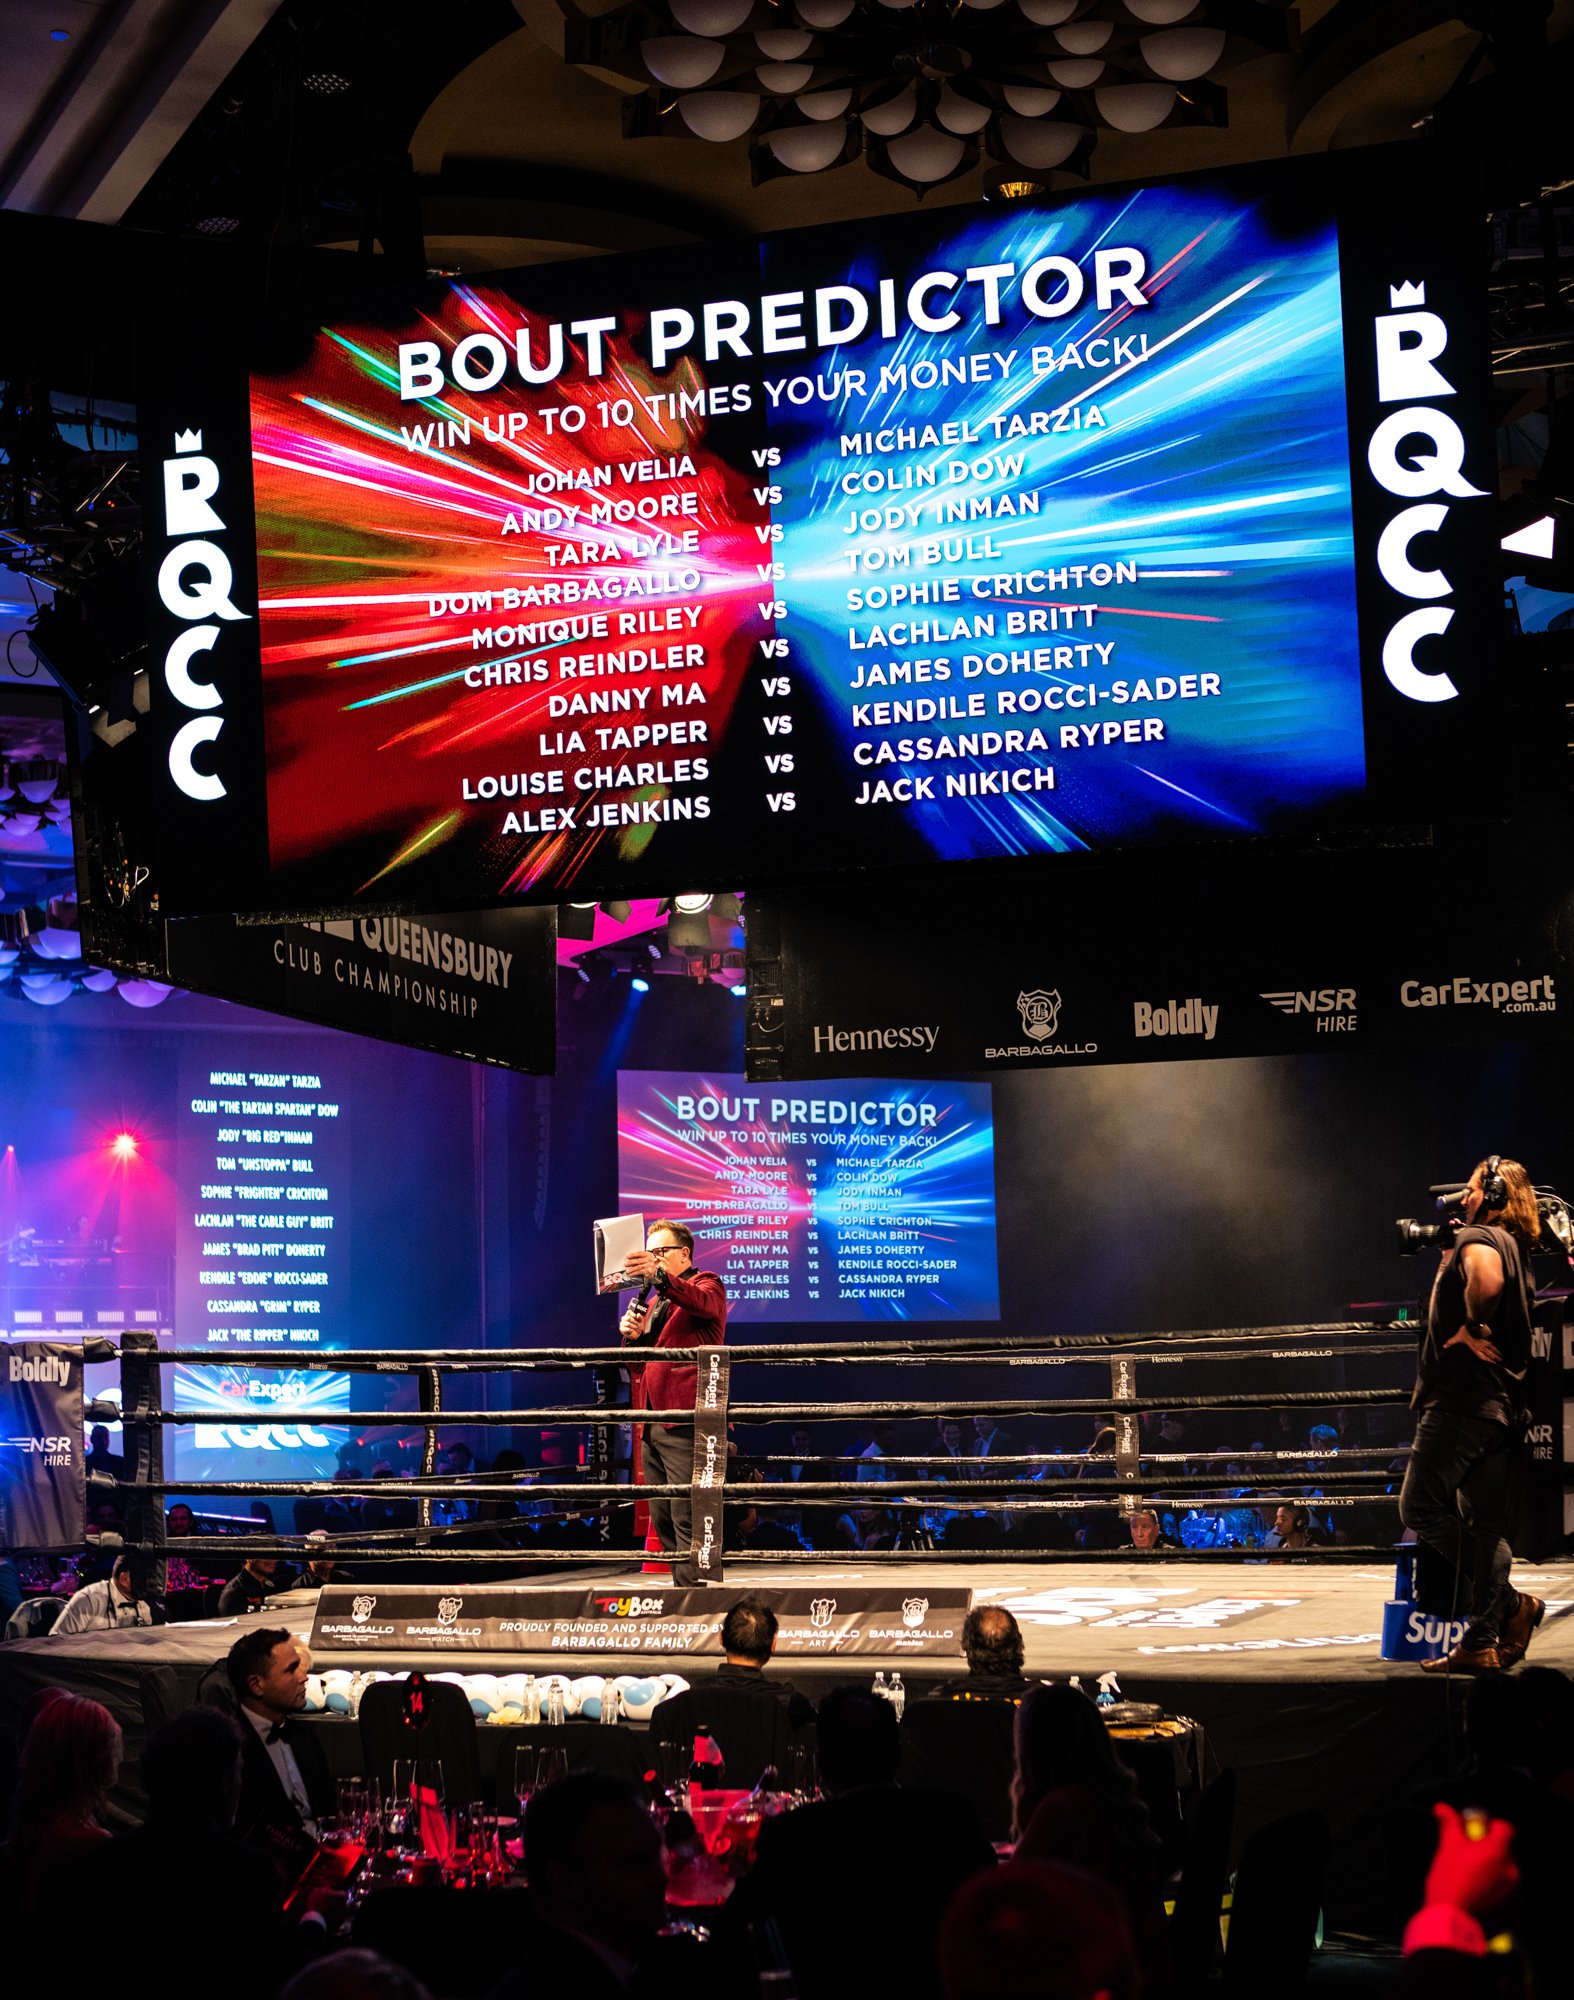 boxing ring with large screens showing bouts